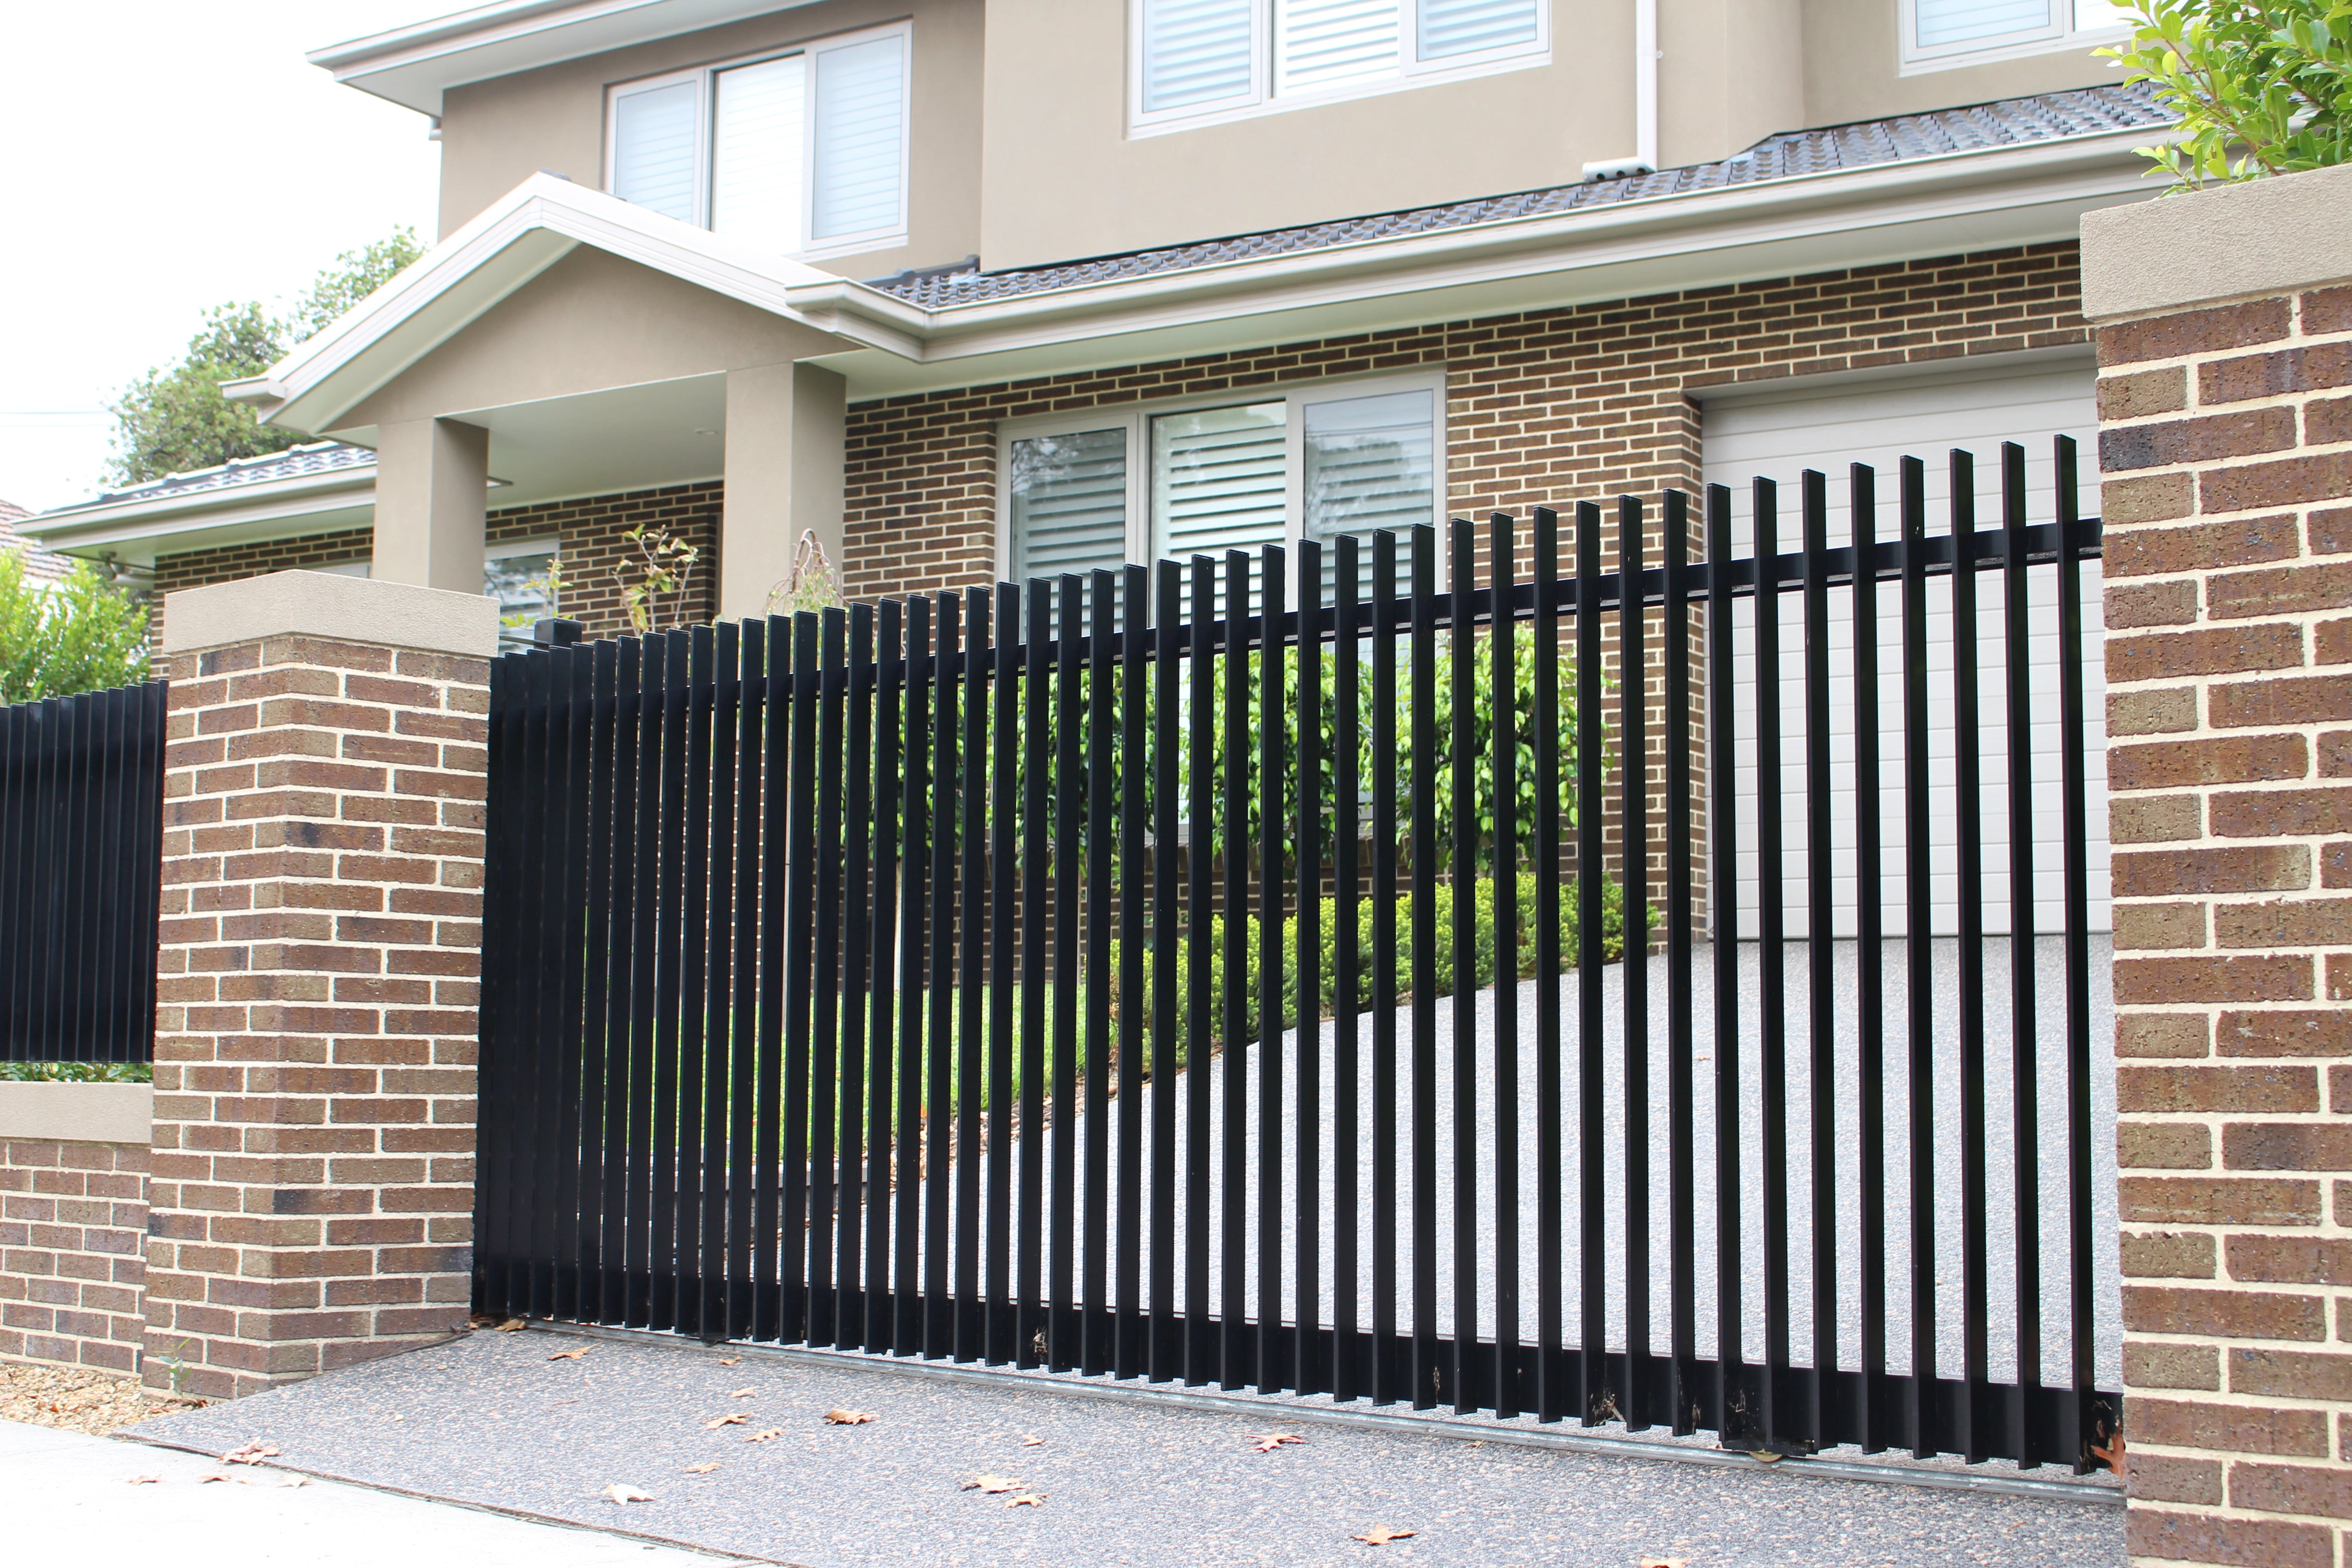 Automatic Gates & Fencing - How much does it cost? What to look for in a gate